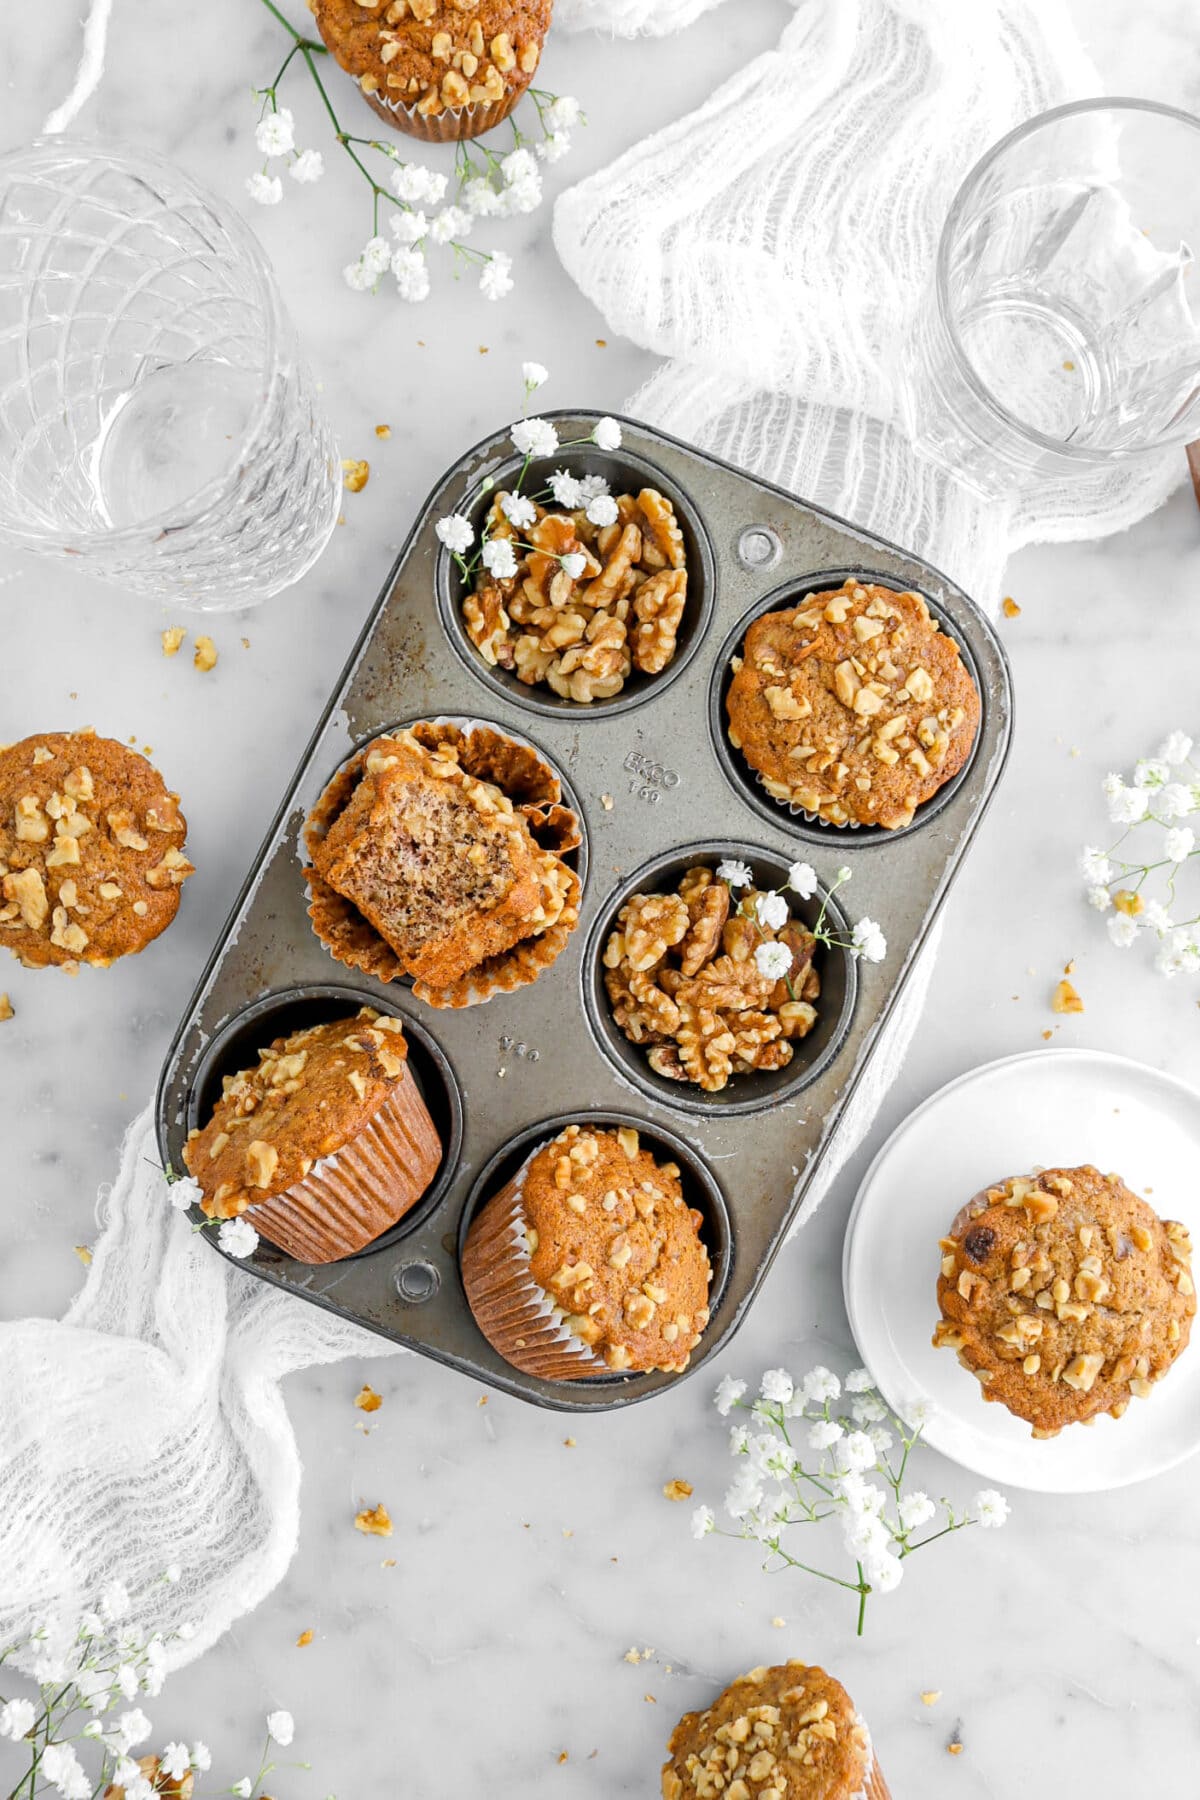 muffins in small muffin pan with one muffin missing a bite, with white flowers and walnuts around on marble surface.